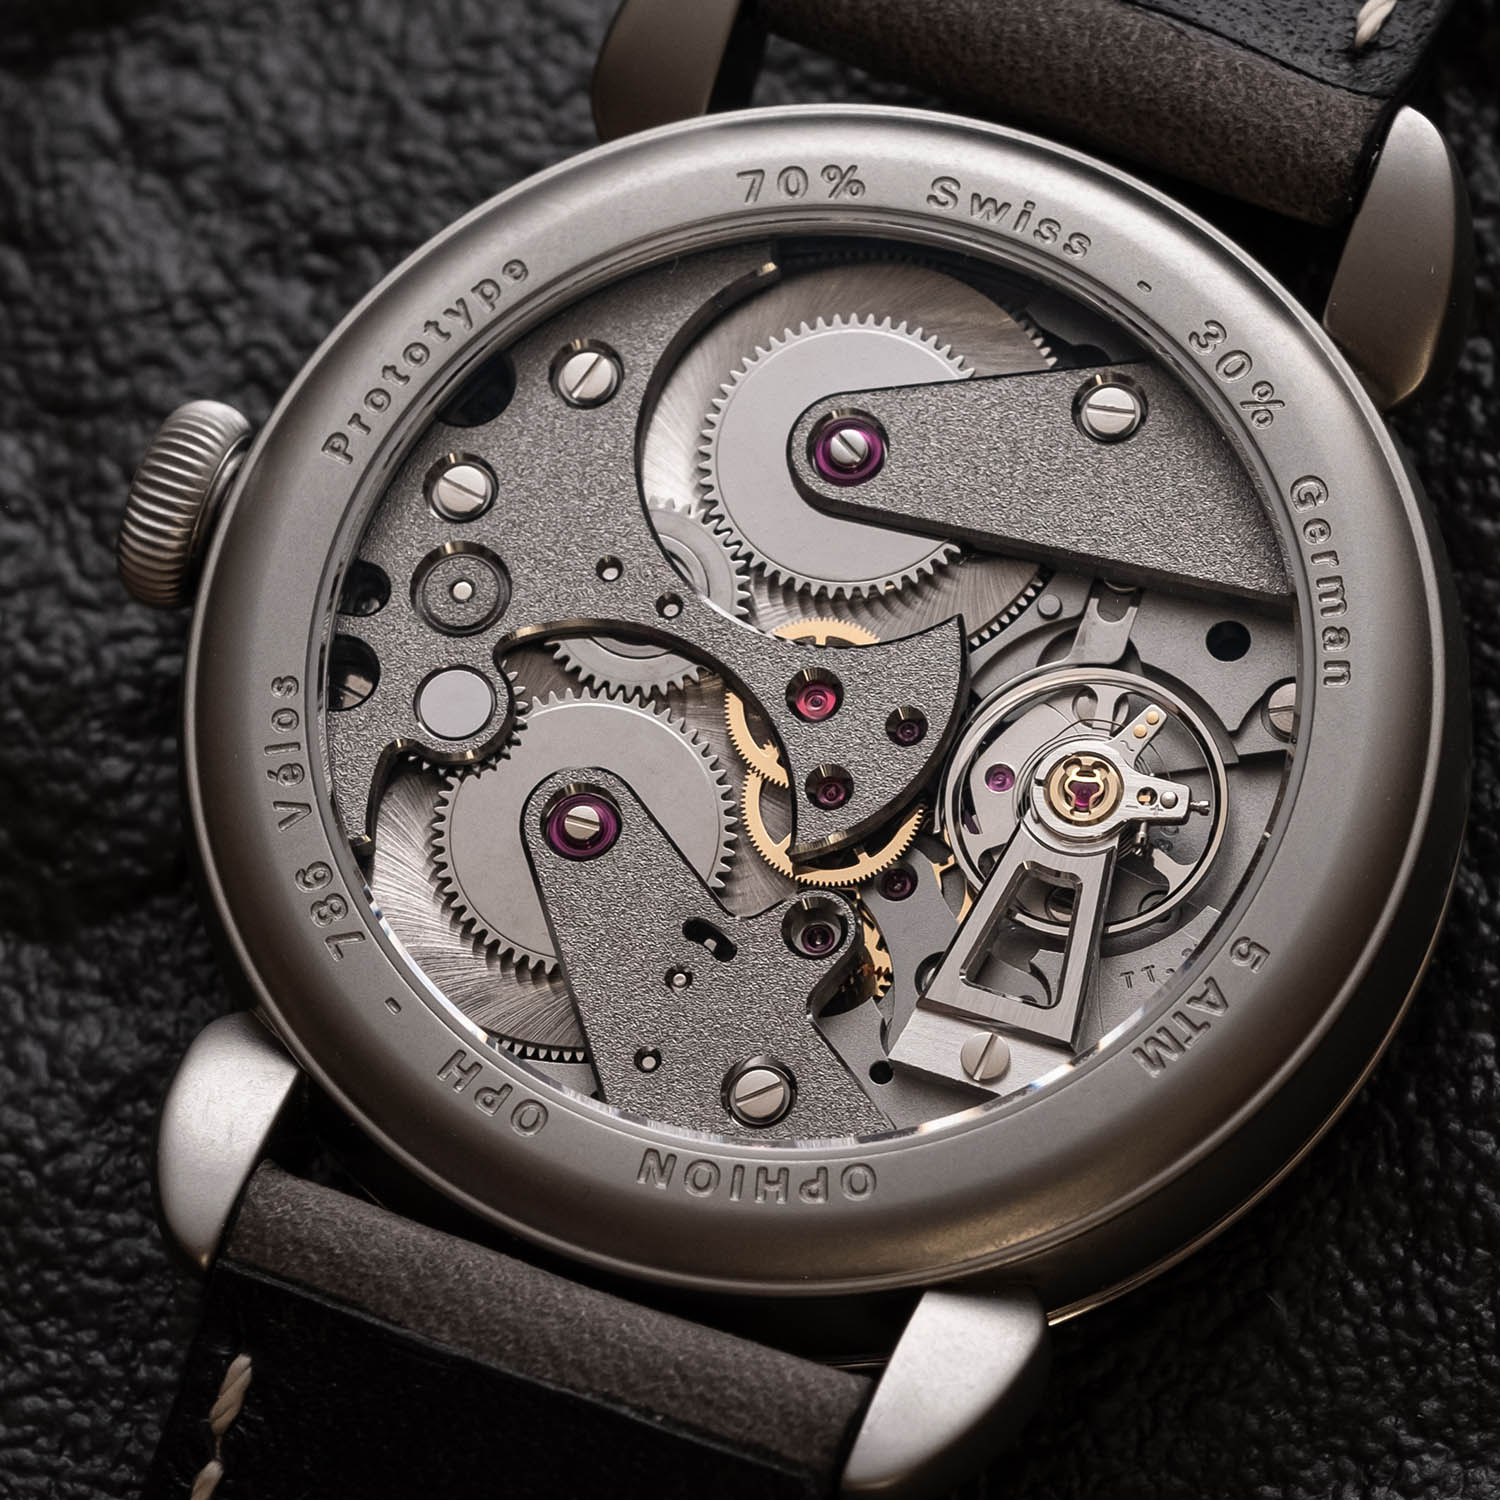 Ophion x The Horophile x The Limited Edition - Ophion Gilt Spectre